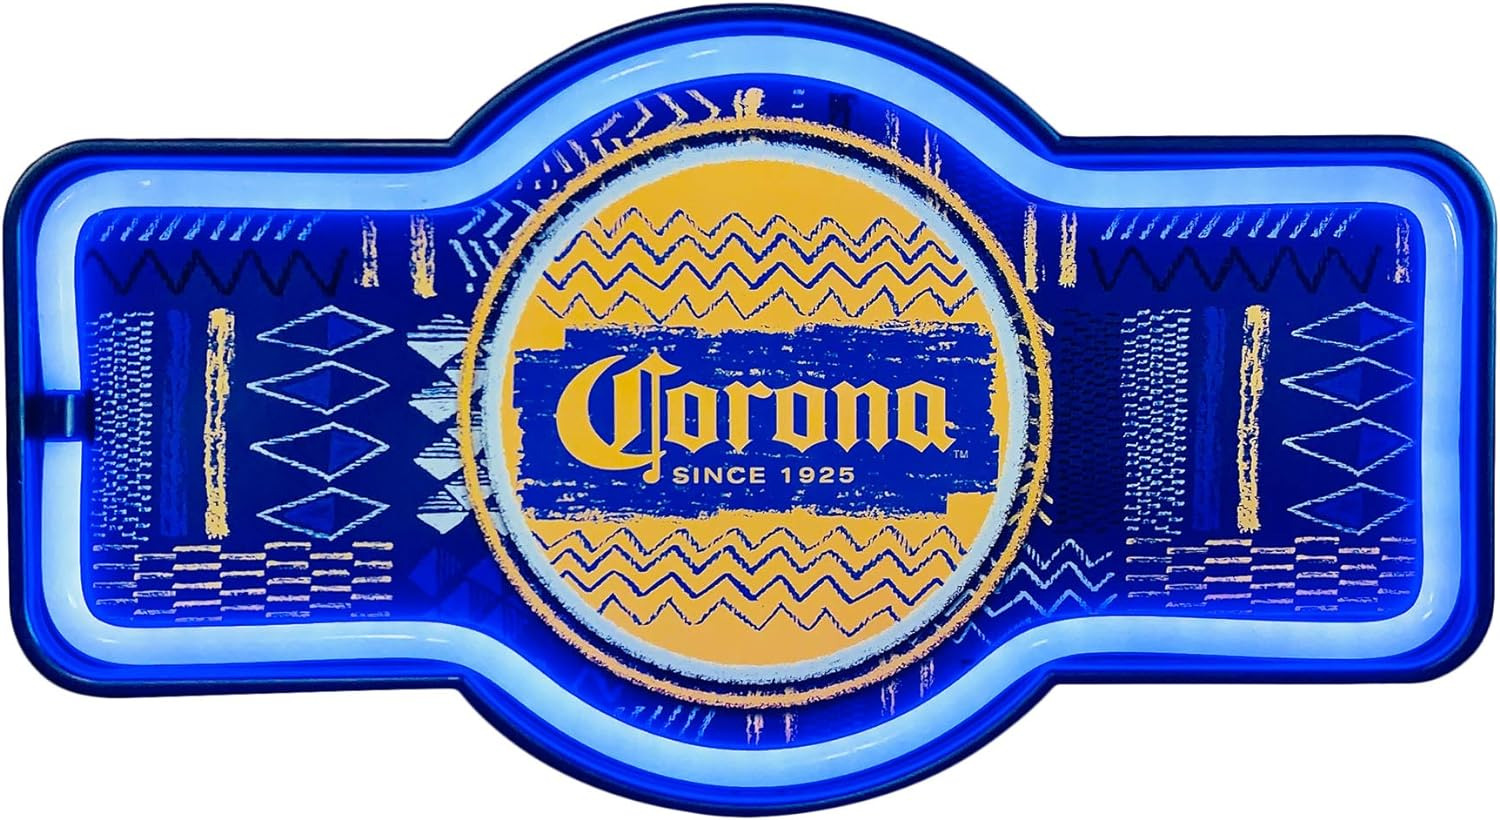 Corona since 1925 Vintage Inspired LED Neon Sign Retro Wall Decor for the Home, 